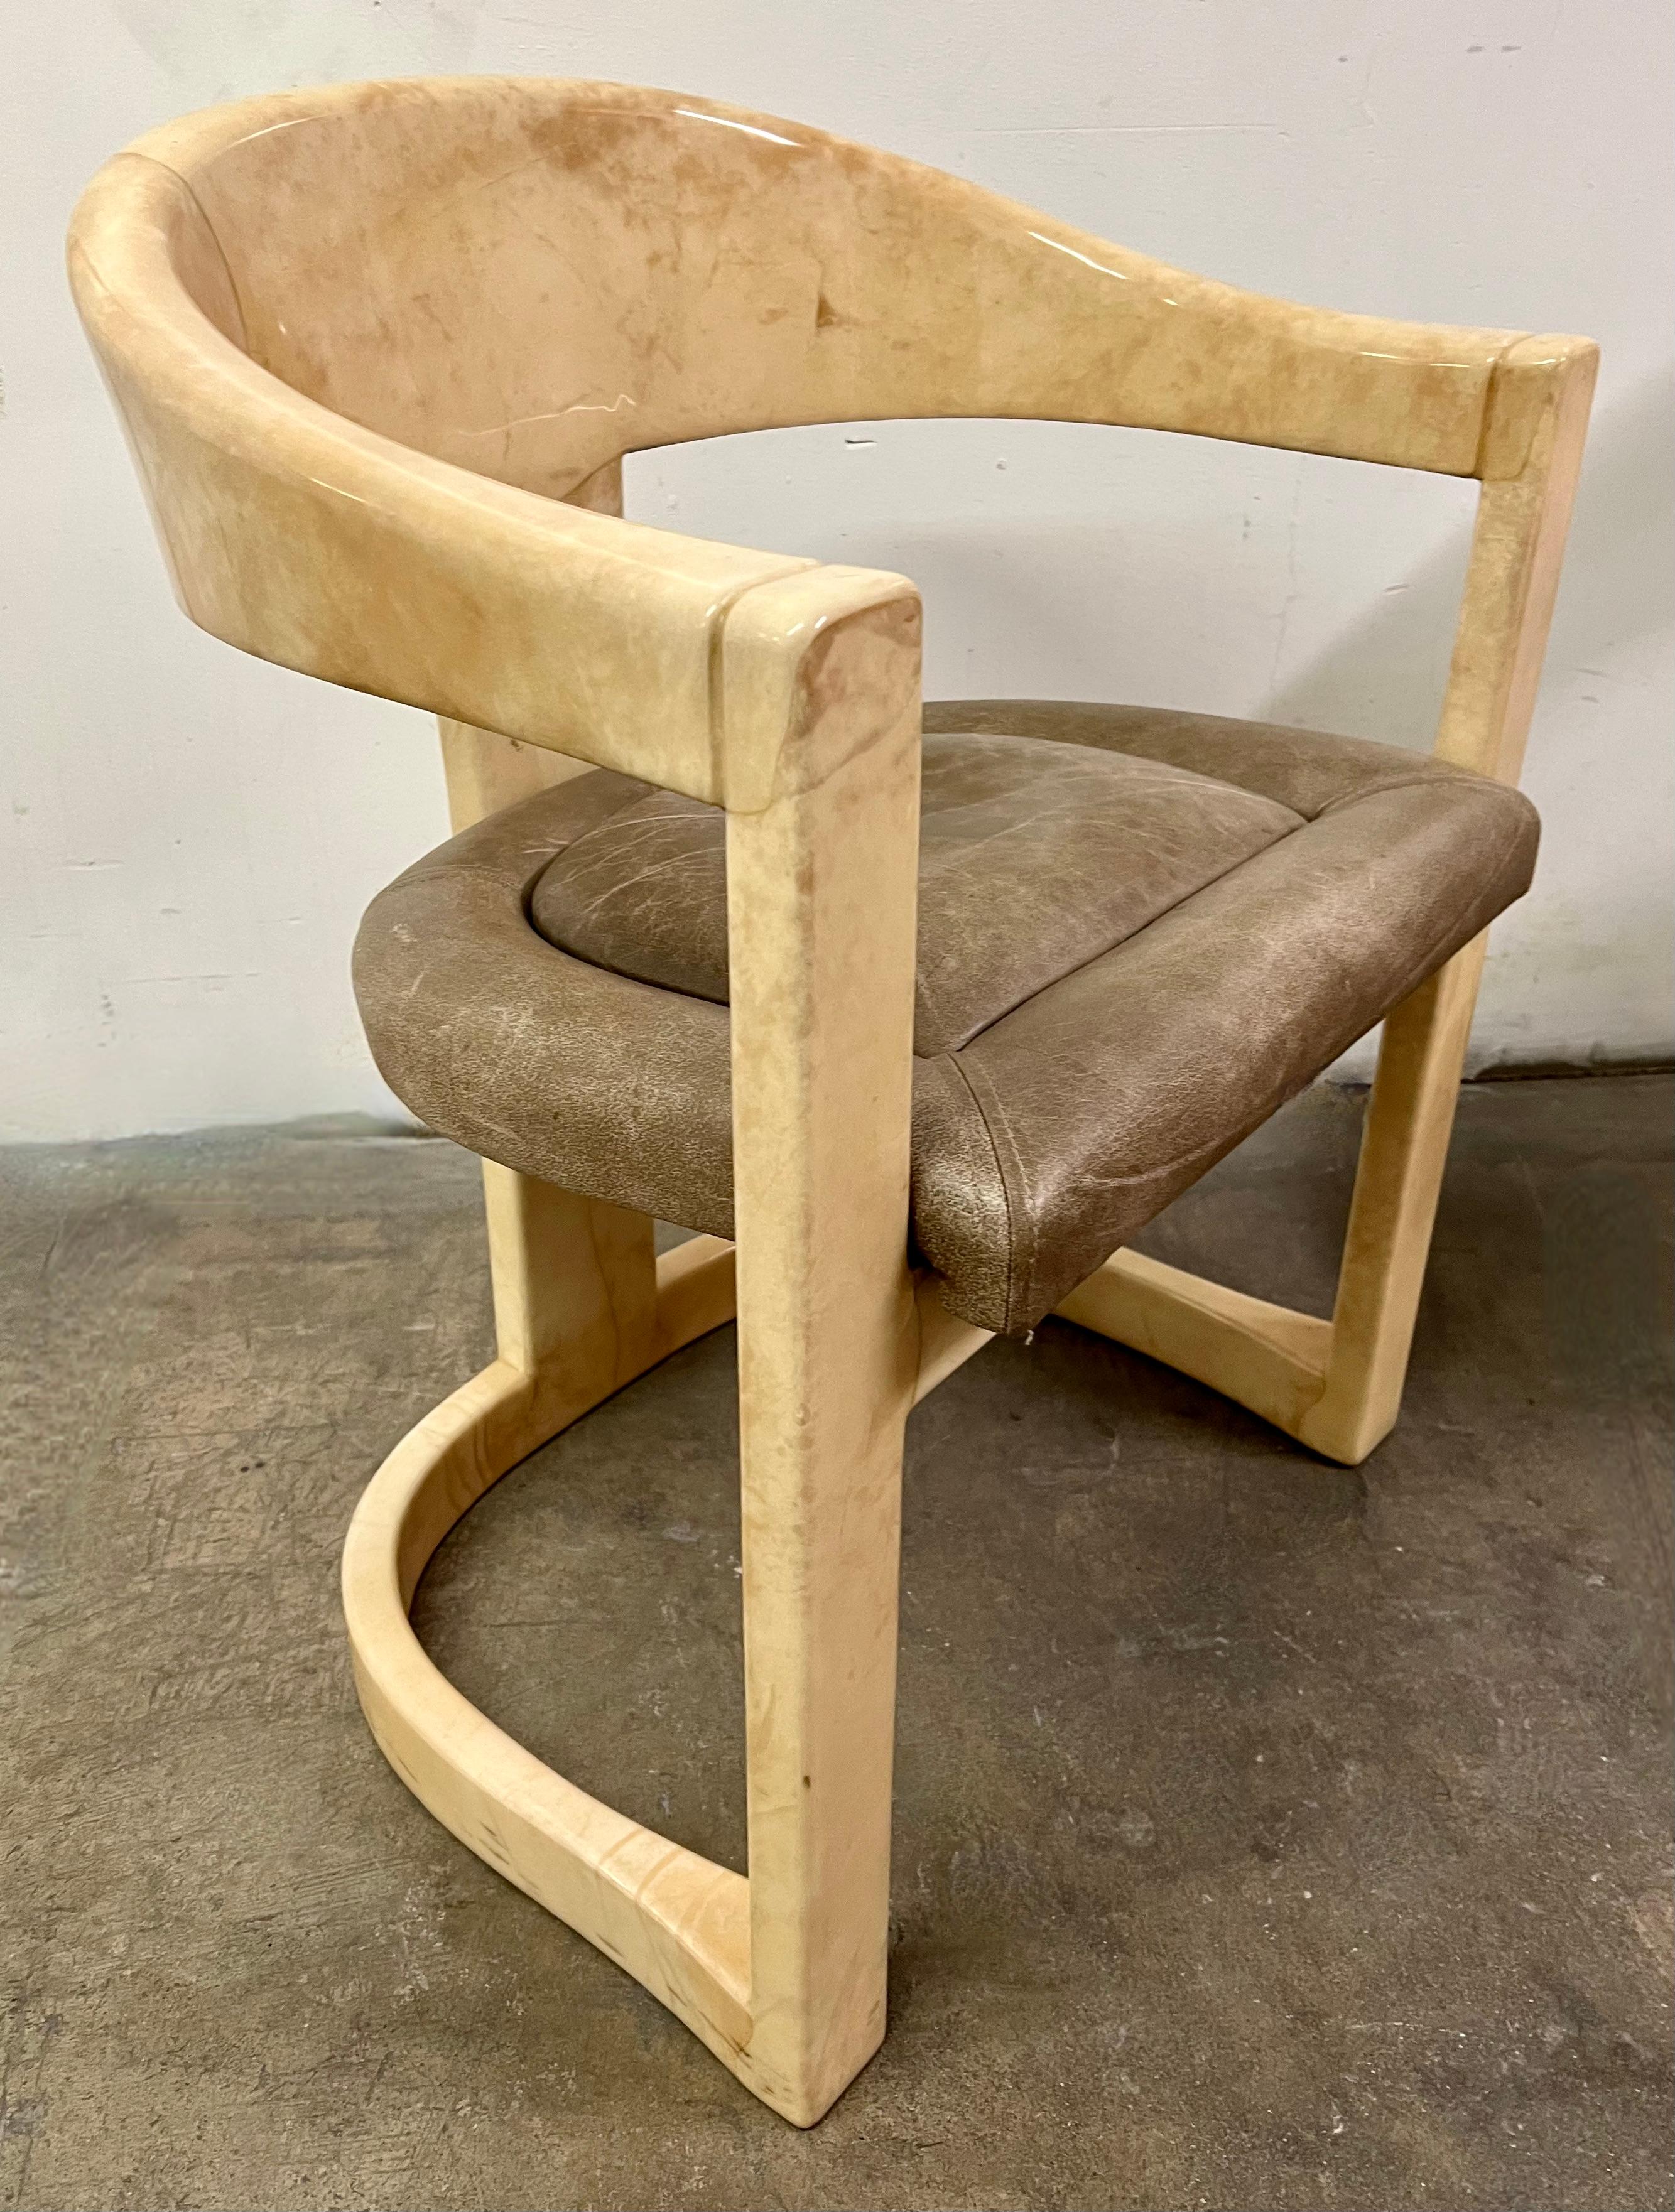 A pair of original Karl Springer Onassis chairs in lacquered goatskin. The pair have been in a one user household and are in great vintage condition. We have six of the same chair in this finish and upholstery... will sell as a pair or all six, and